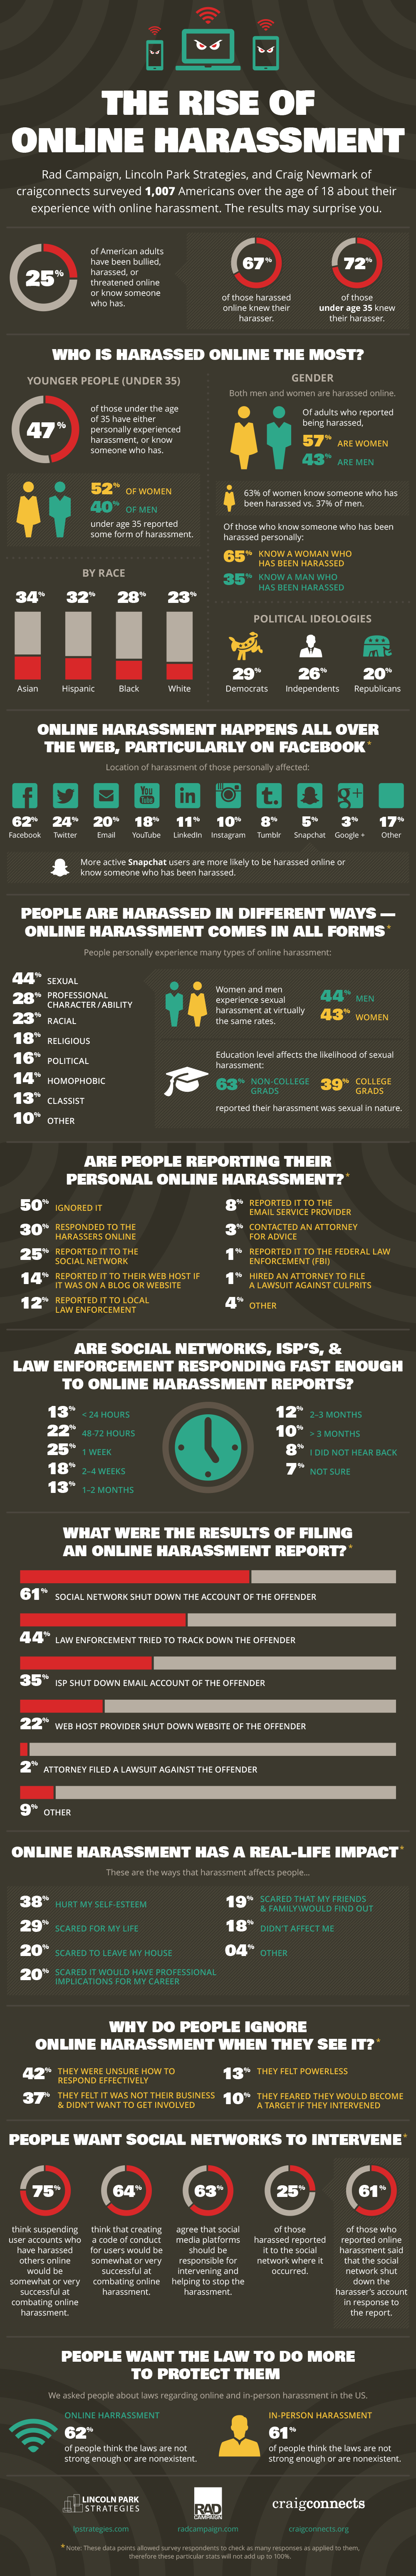 The Rise of Online Harassment